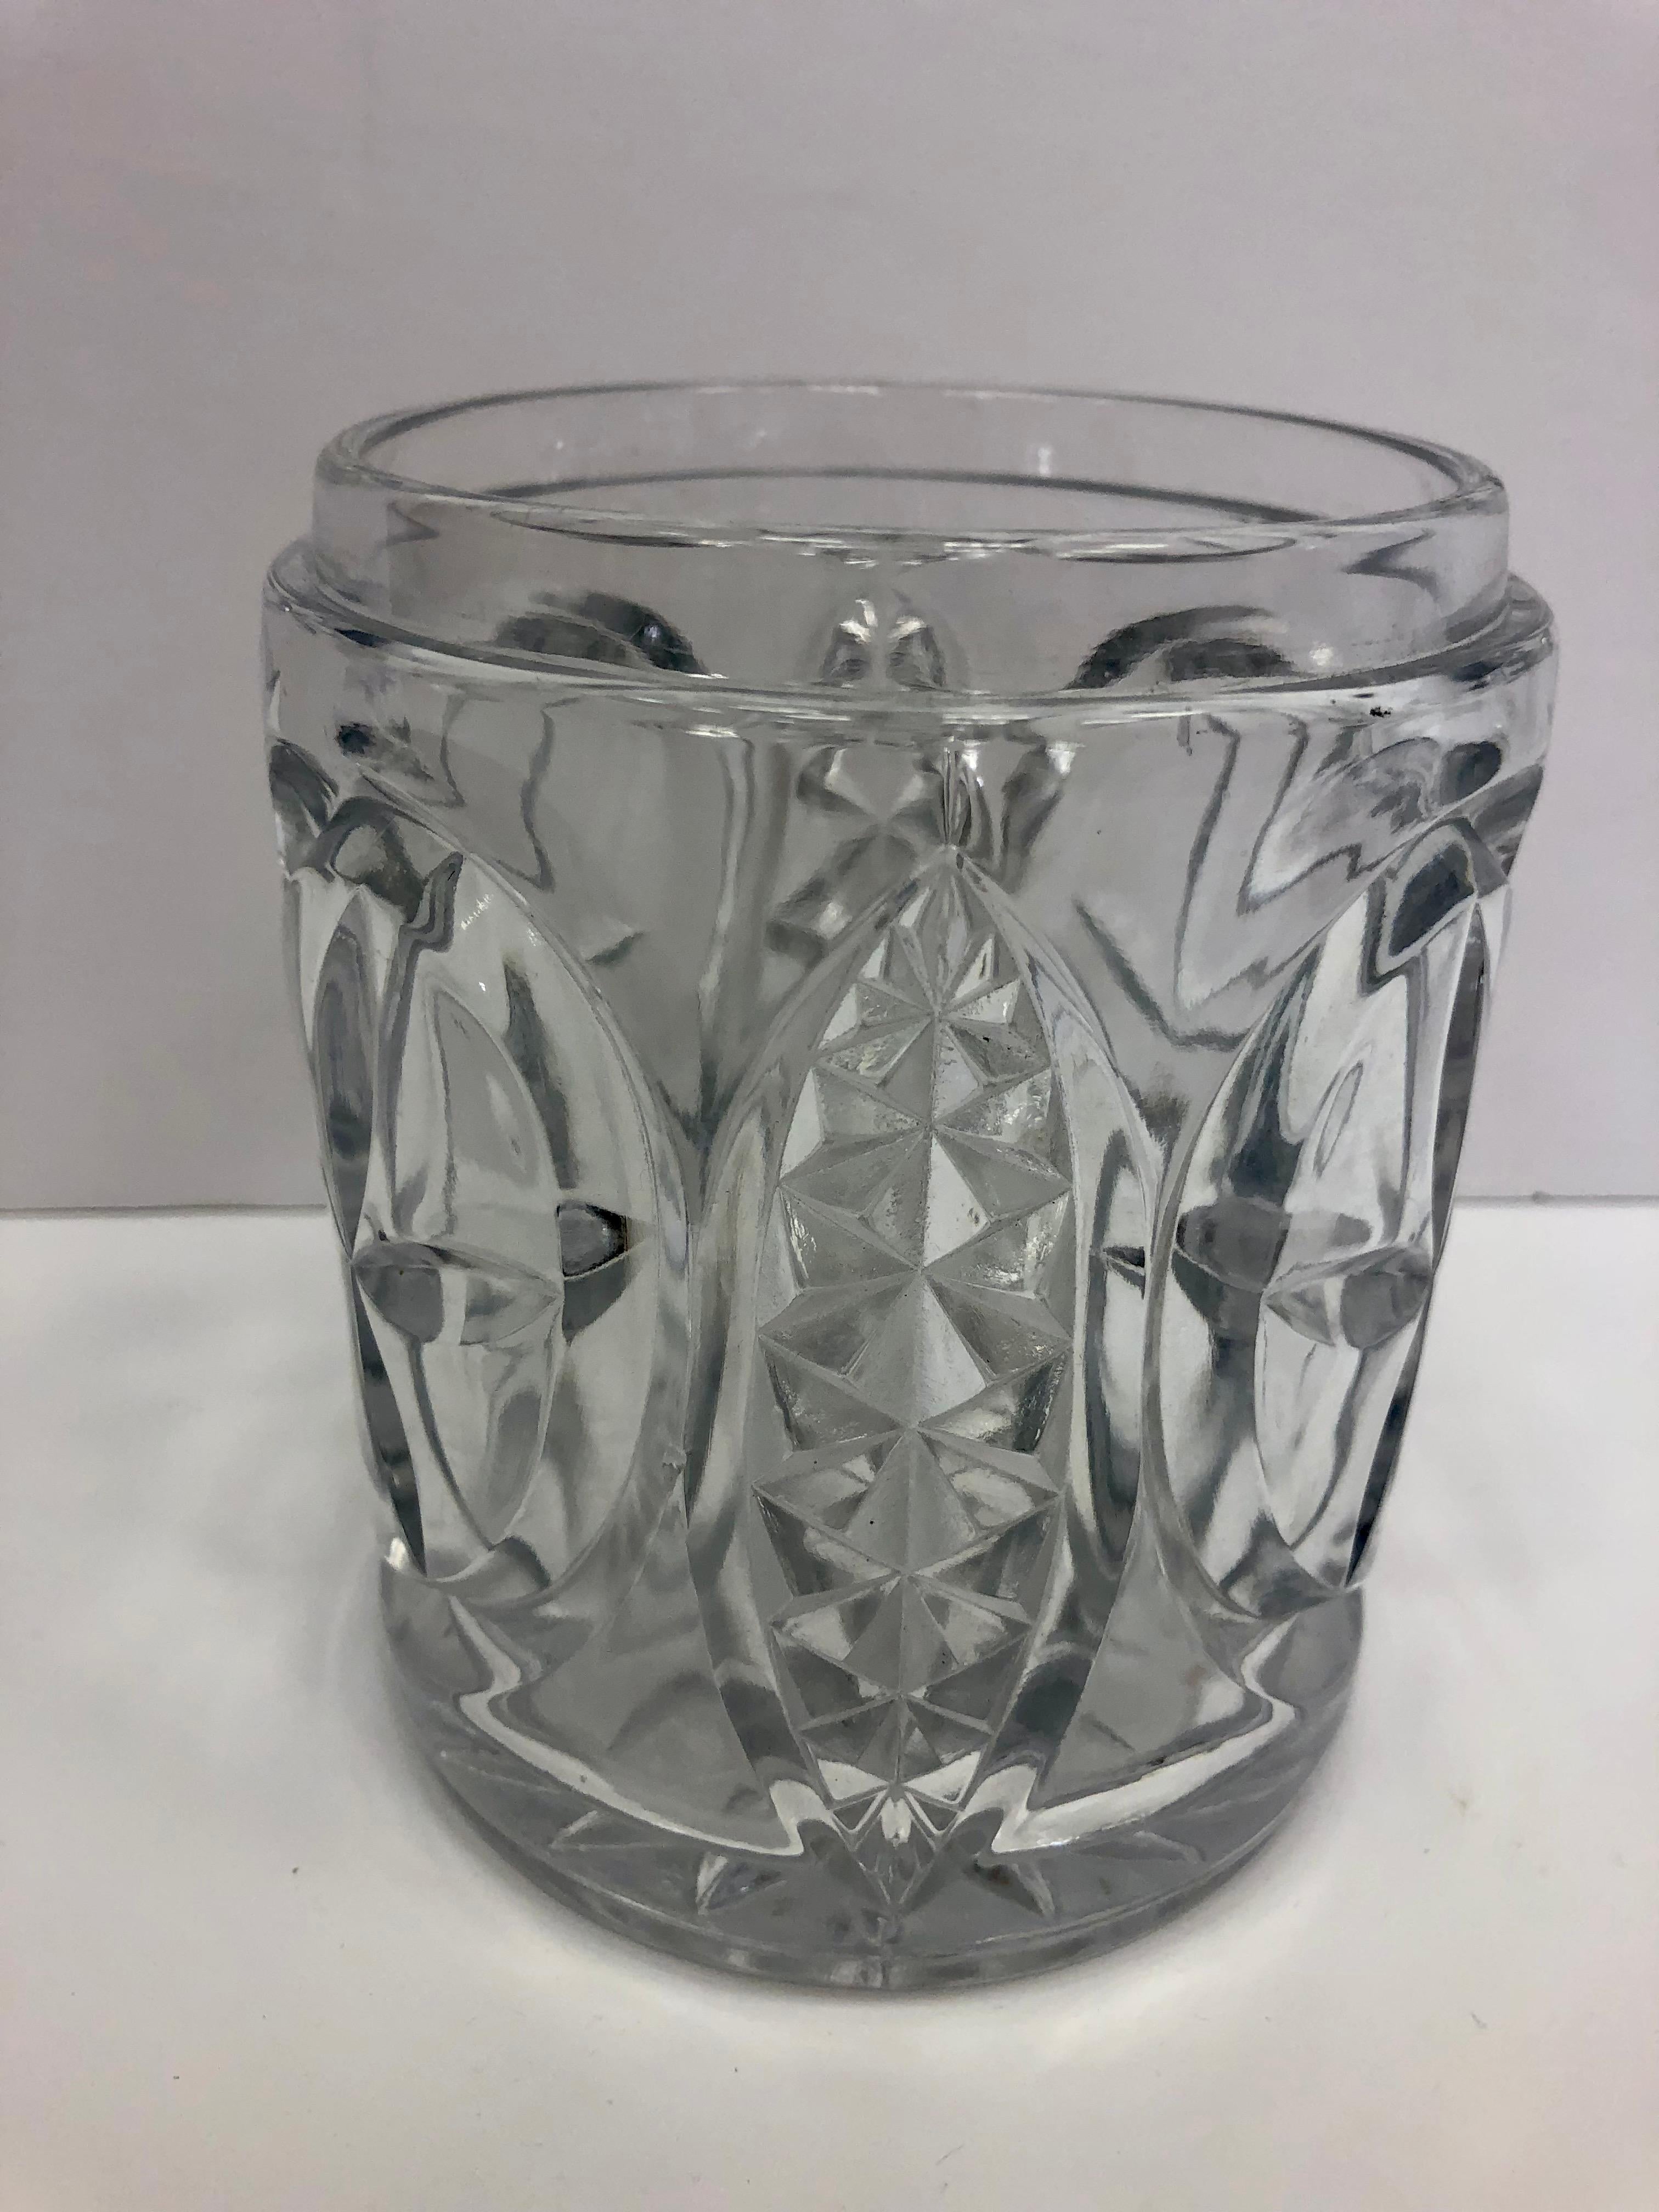 Late 19th Century Crystal Biscuit Jar with a Decorative Silver Top In Good Condition For Sale In Stamford, CT